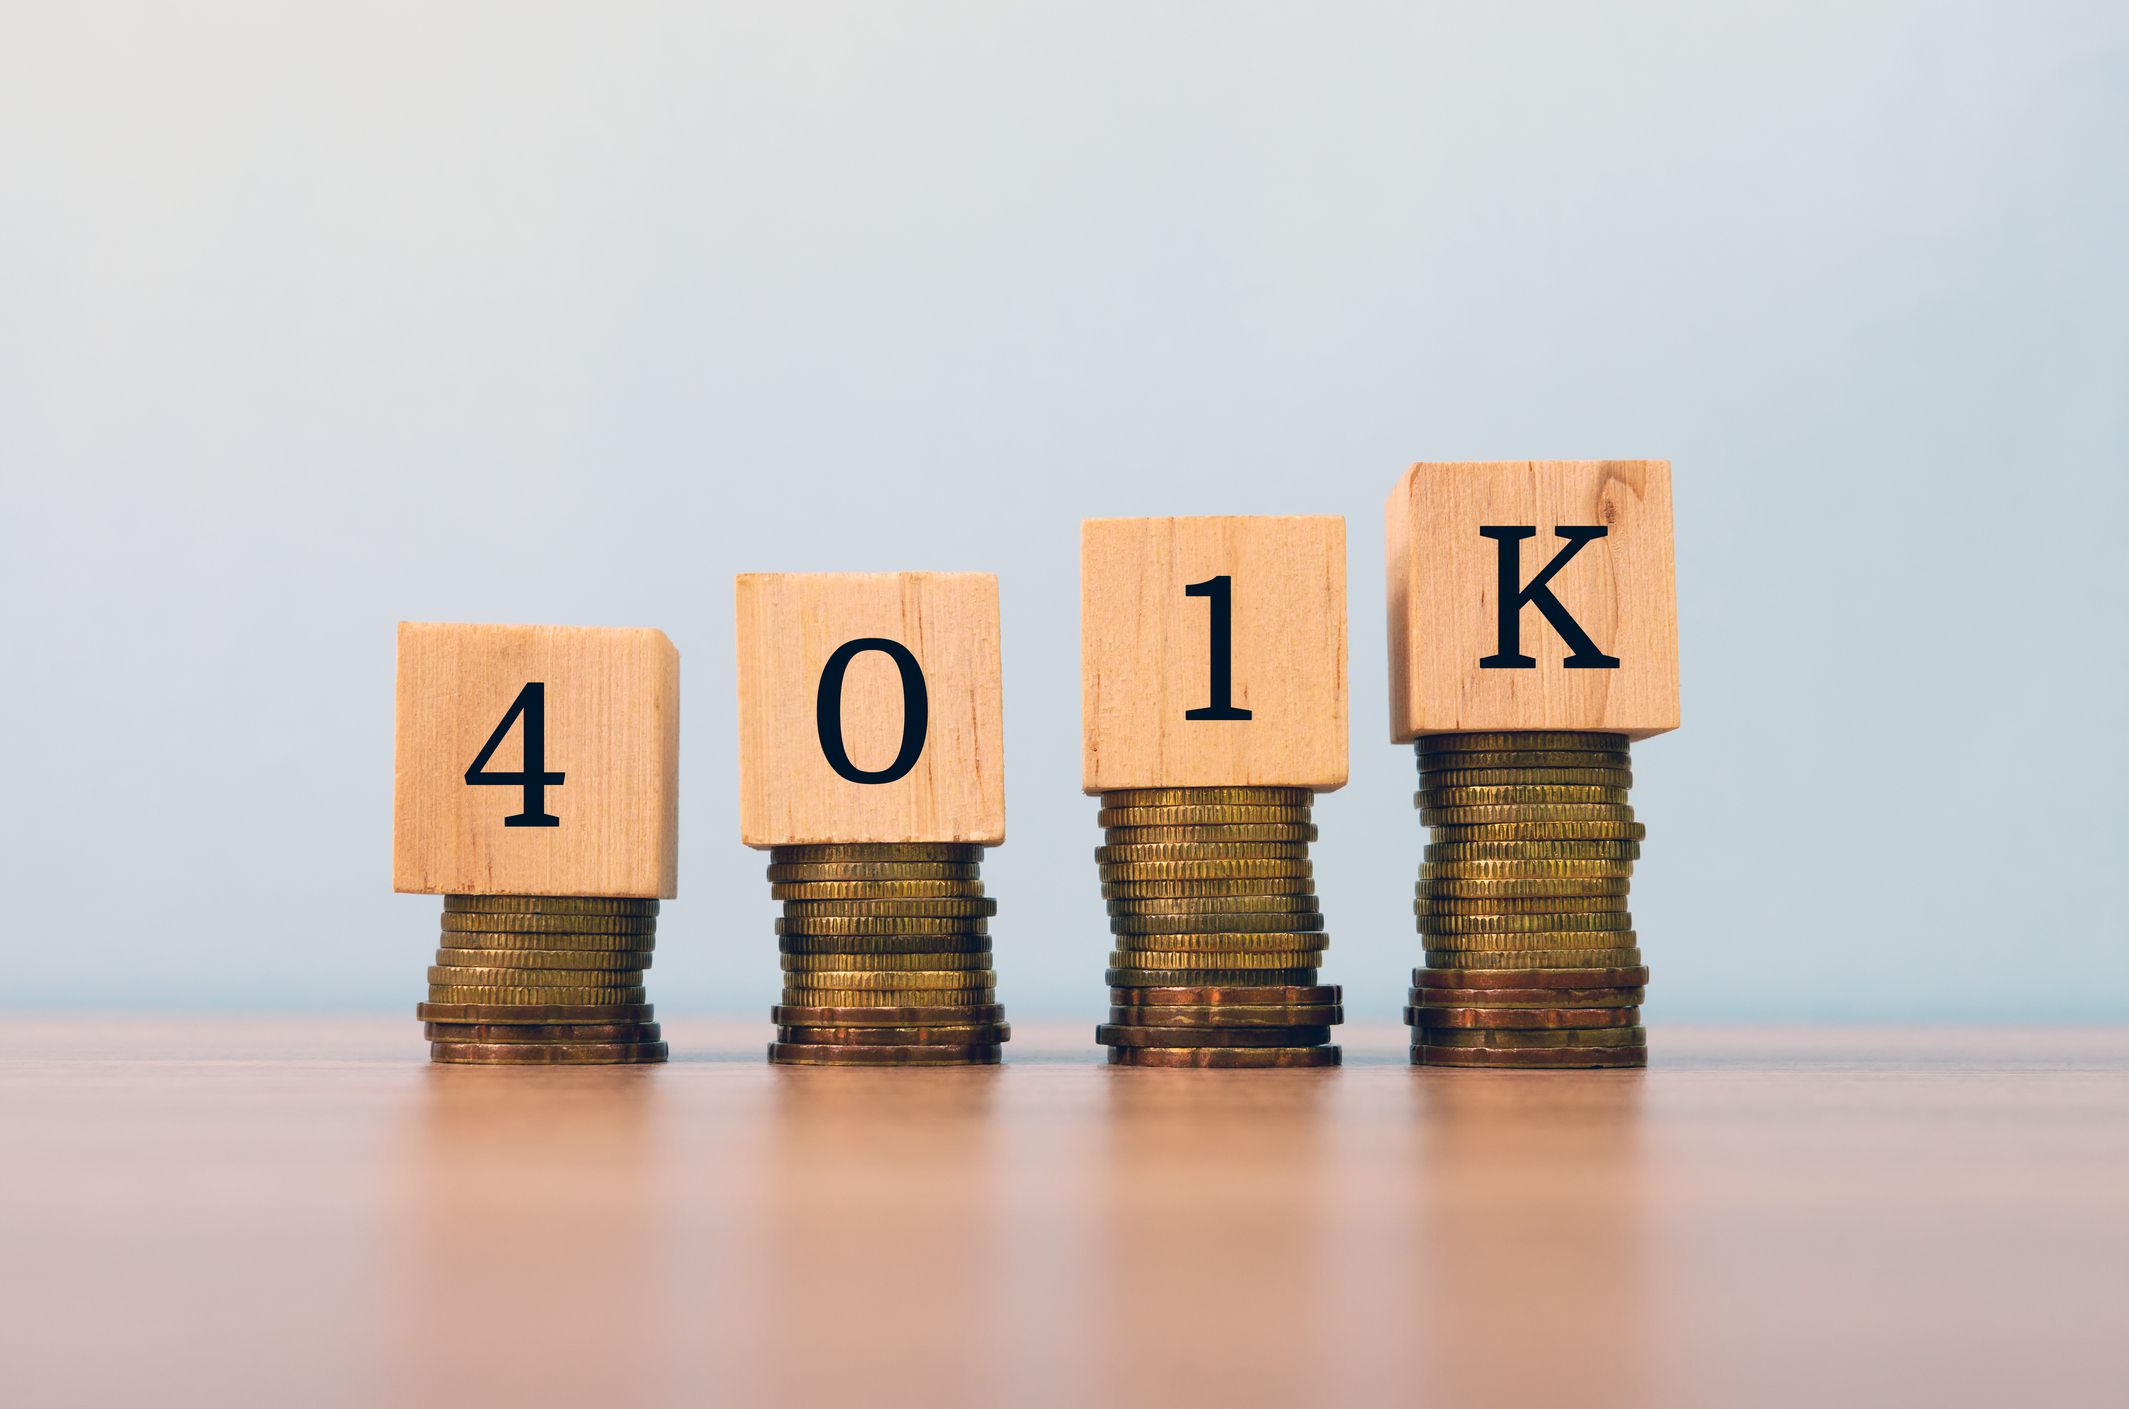 What Are the Benefits of Contributing to a 401(k)?